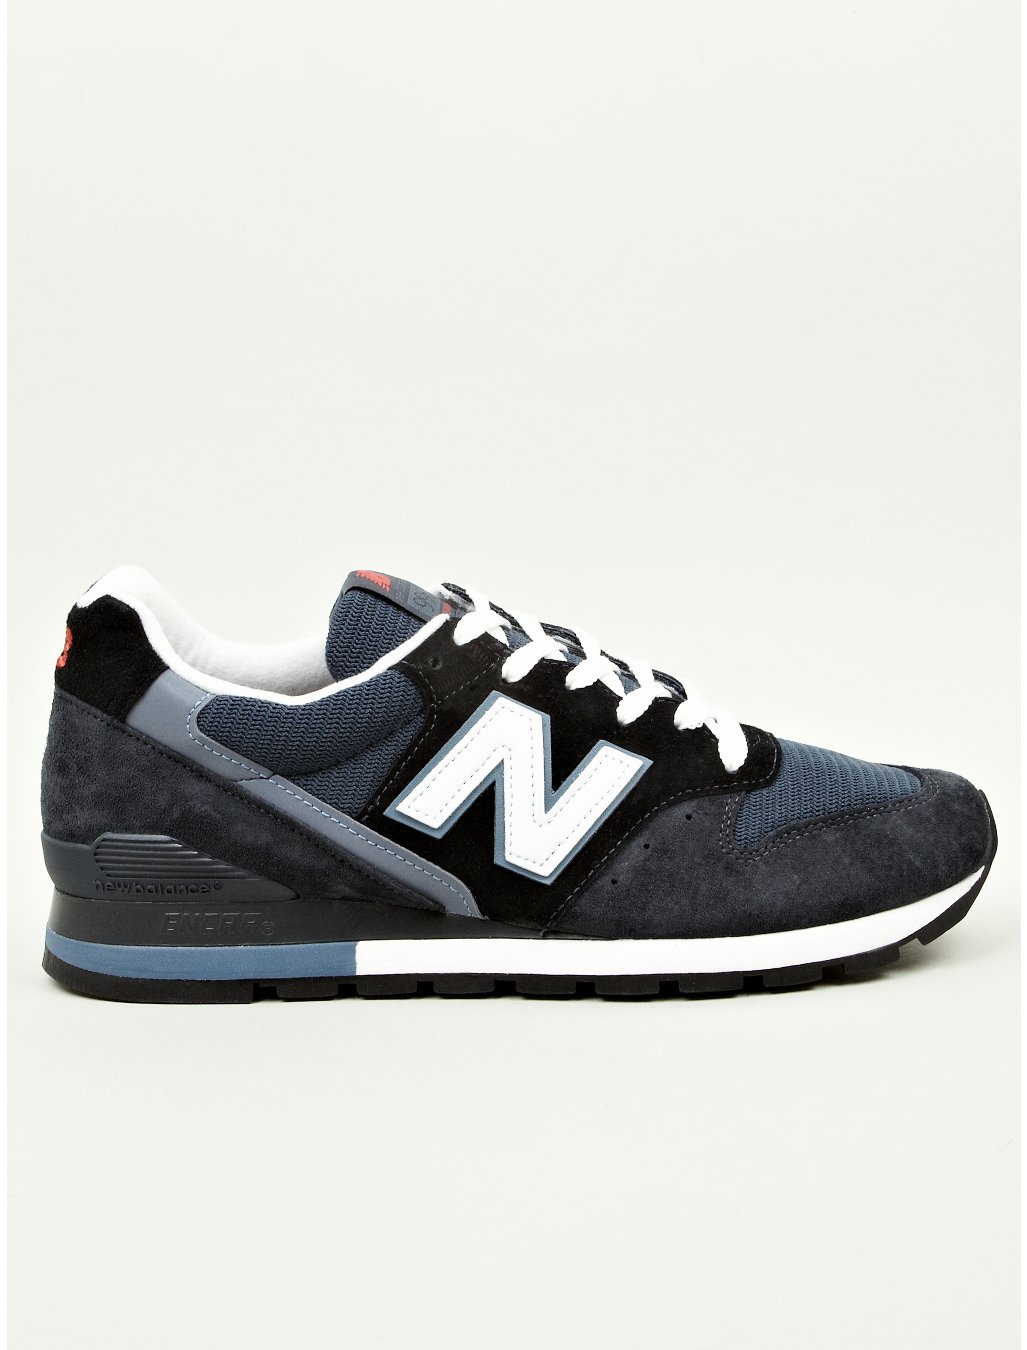 New Balance M996st Made in Usa Sneakers in Black for Men | Lyst